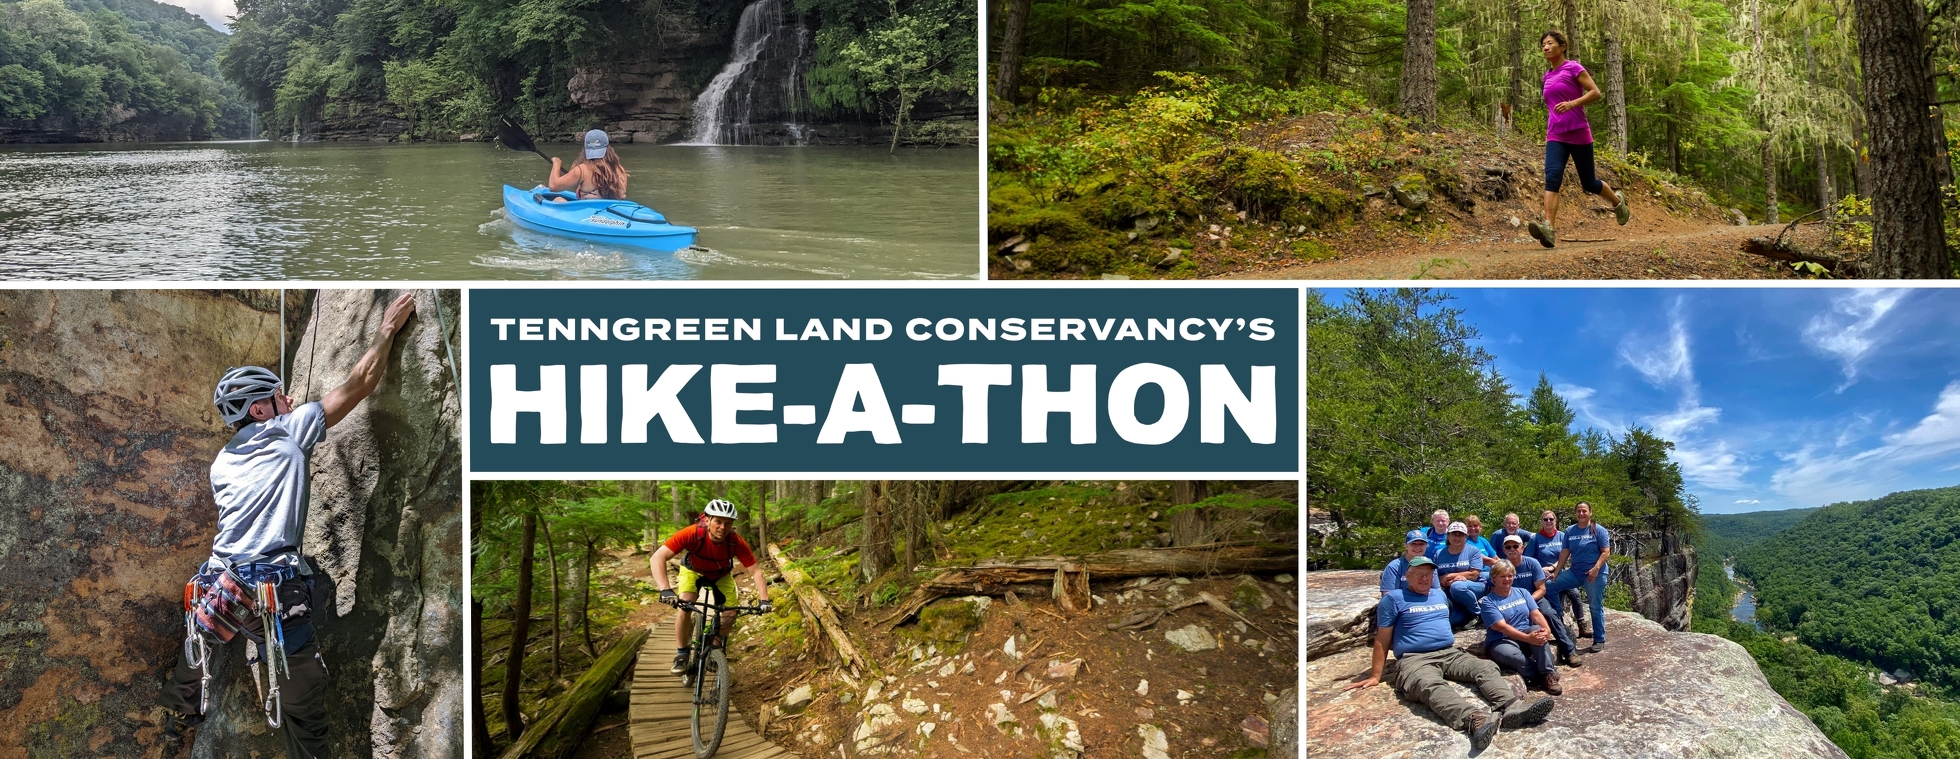 TennGreen Land Conservancy's Hike-a-Thon